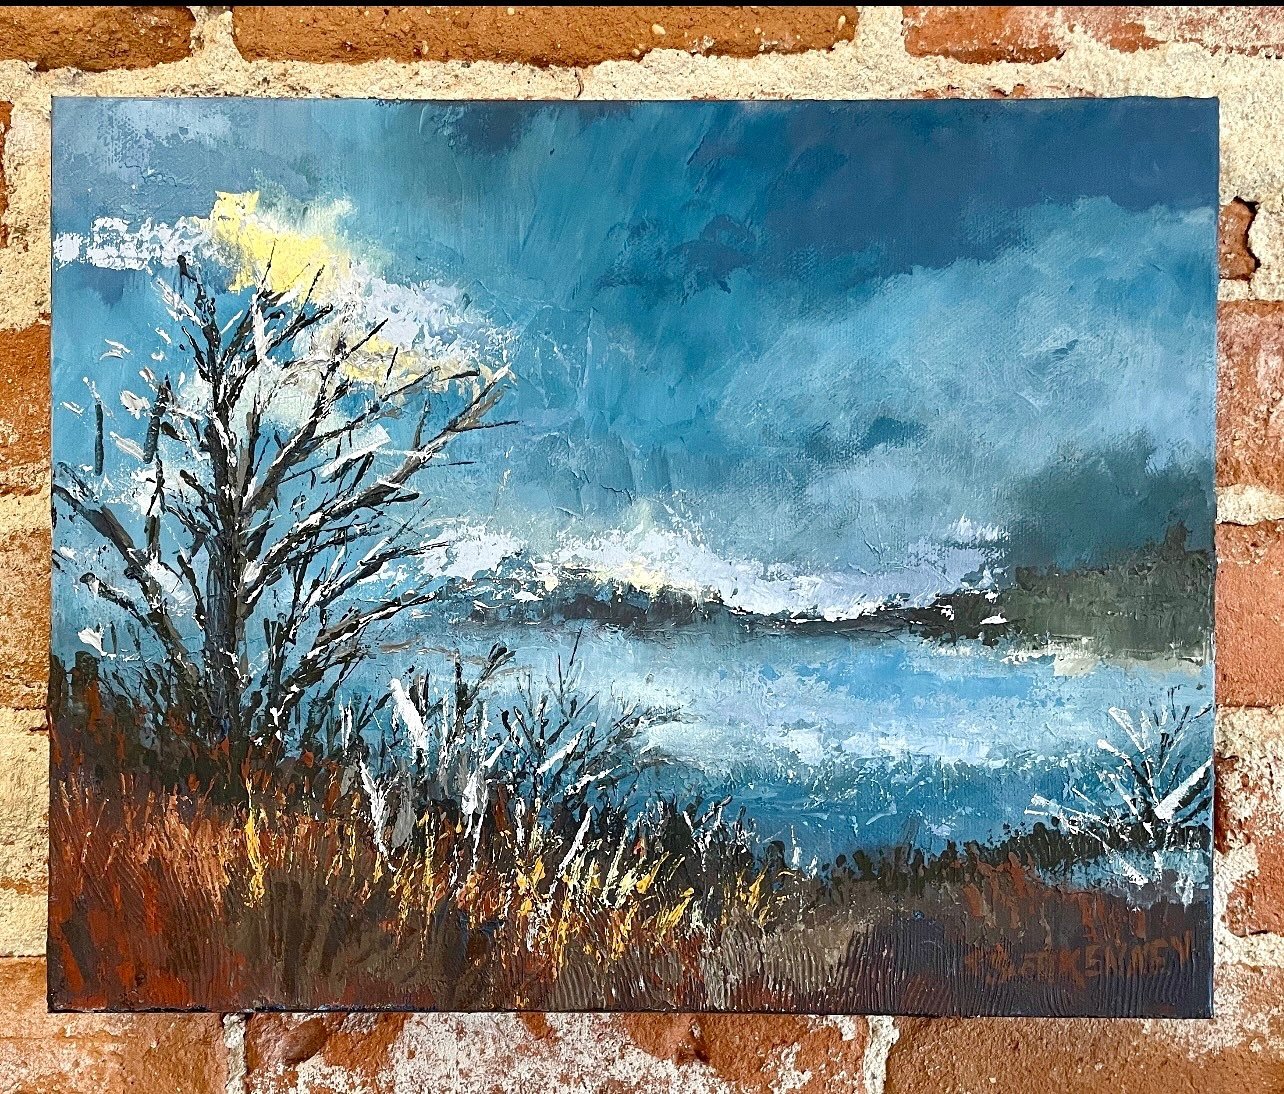 🔴 SOLD! &ldquo;Winter Beckons&rdquo; by artist Susan Scott Kenney, 11 x 14 acrylic on panel, certainly has year-round appeal! Whether you&rsquo;re matching colors, moods, seasons, or just looking for something that speaks to you - @silvercirclegalle